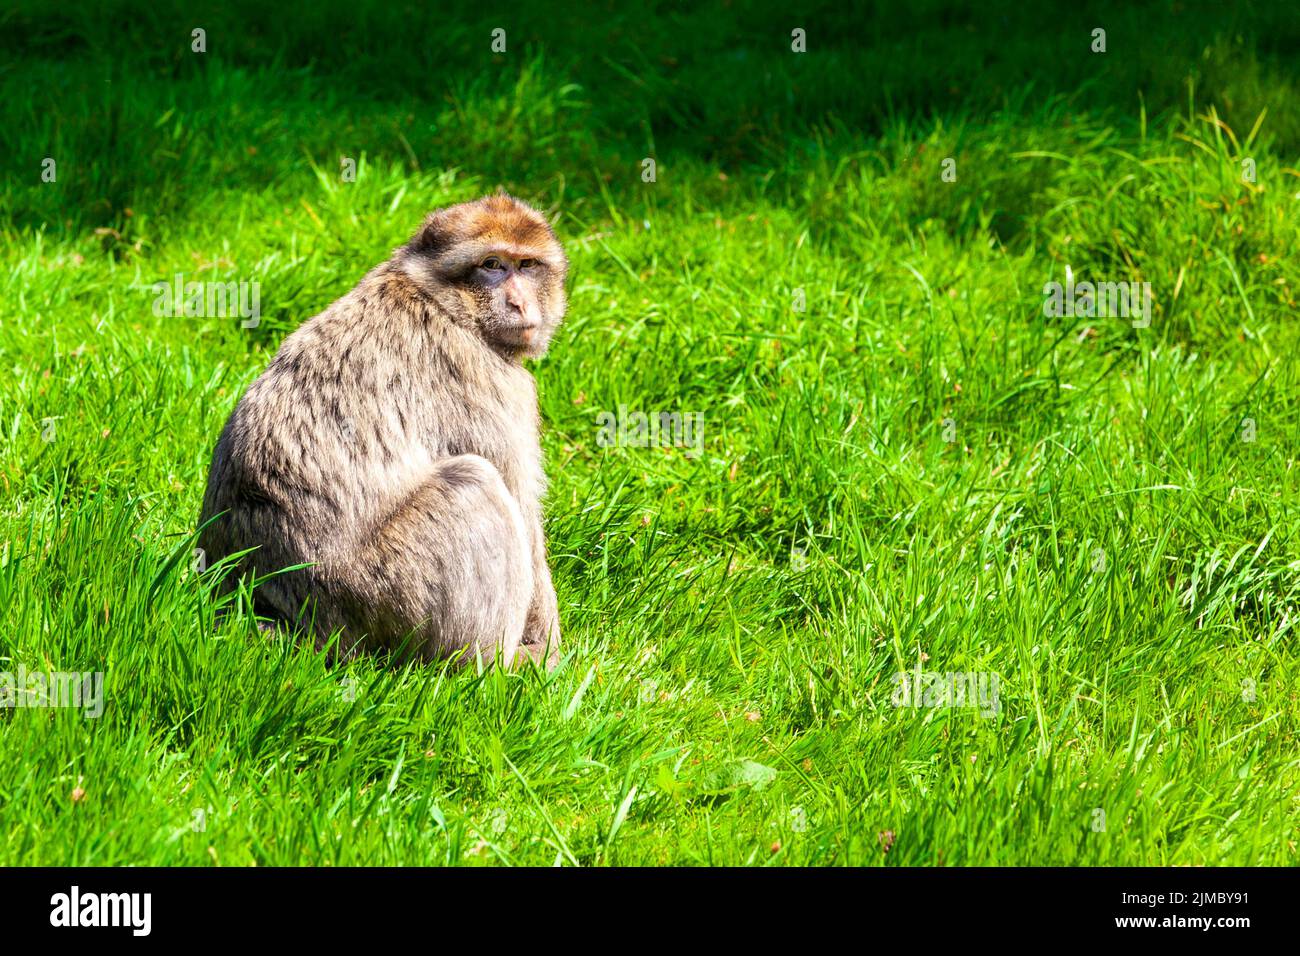 Barbary macaque monkey (Barbary macaque) at Trentham Monkey Forest, Stoke-on-Trent, Staffordshire, UK Stock Photo